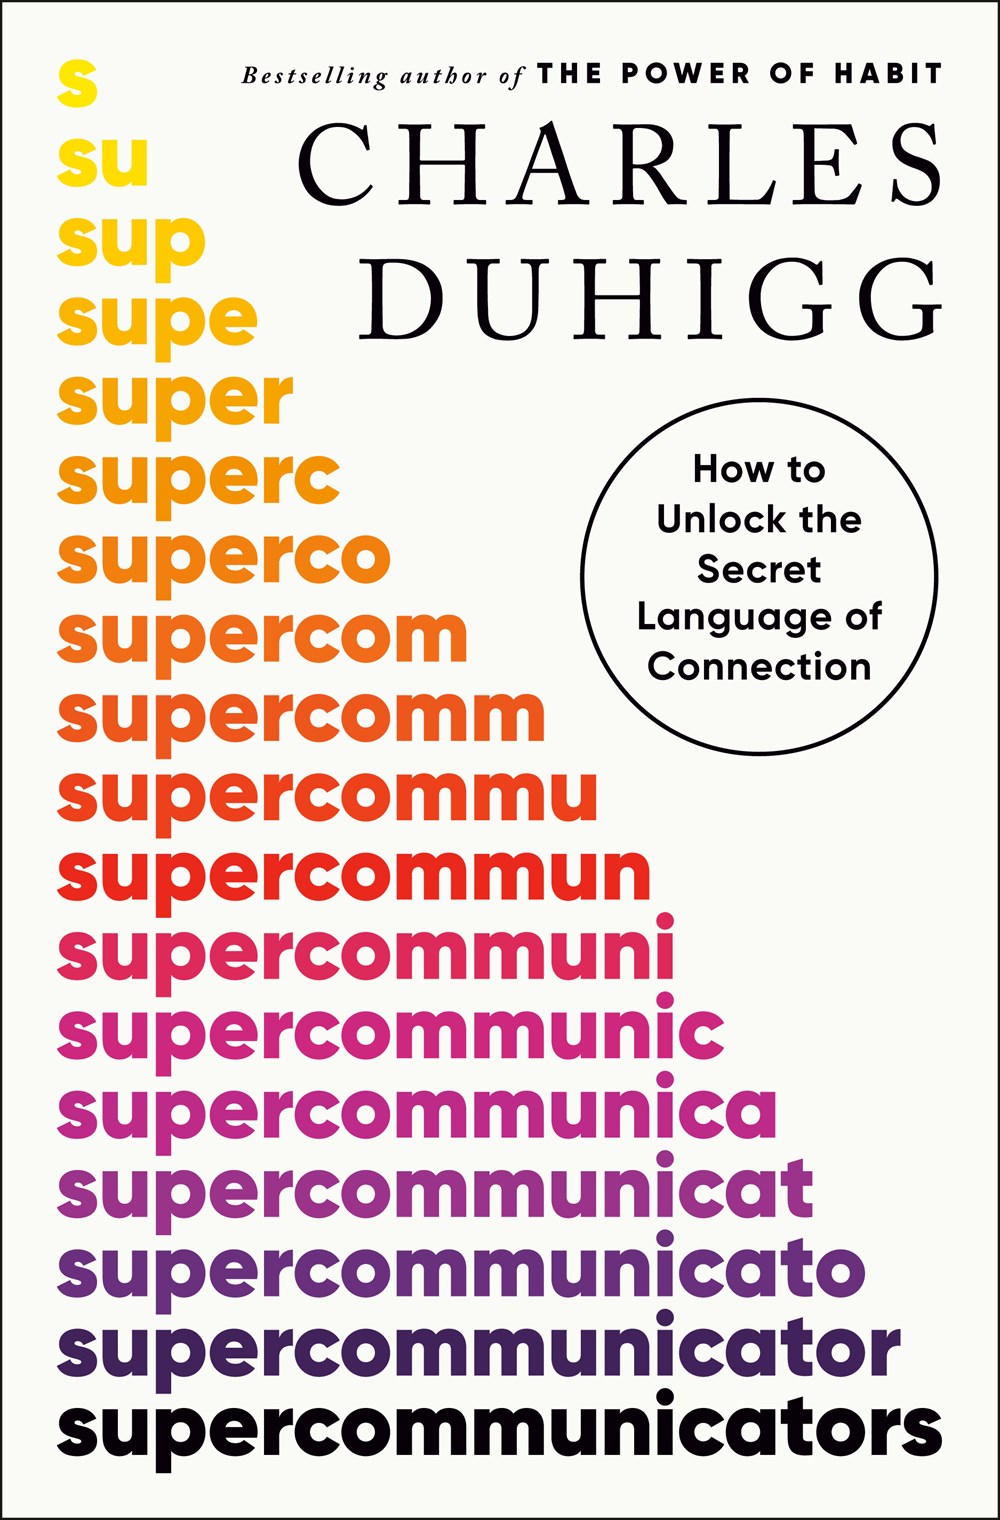 Supercommunicators: How to Unlock the Secret Language of Connection by Charles Duhigg (2/20/24)